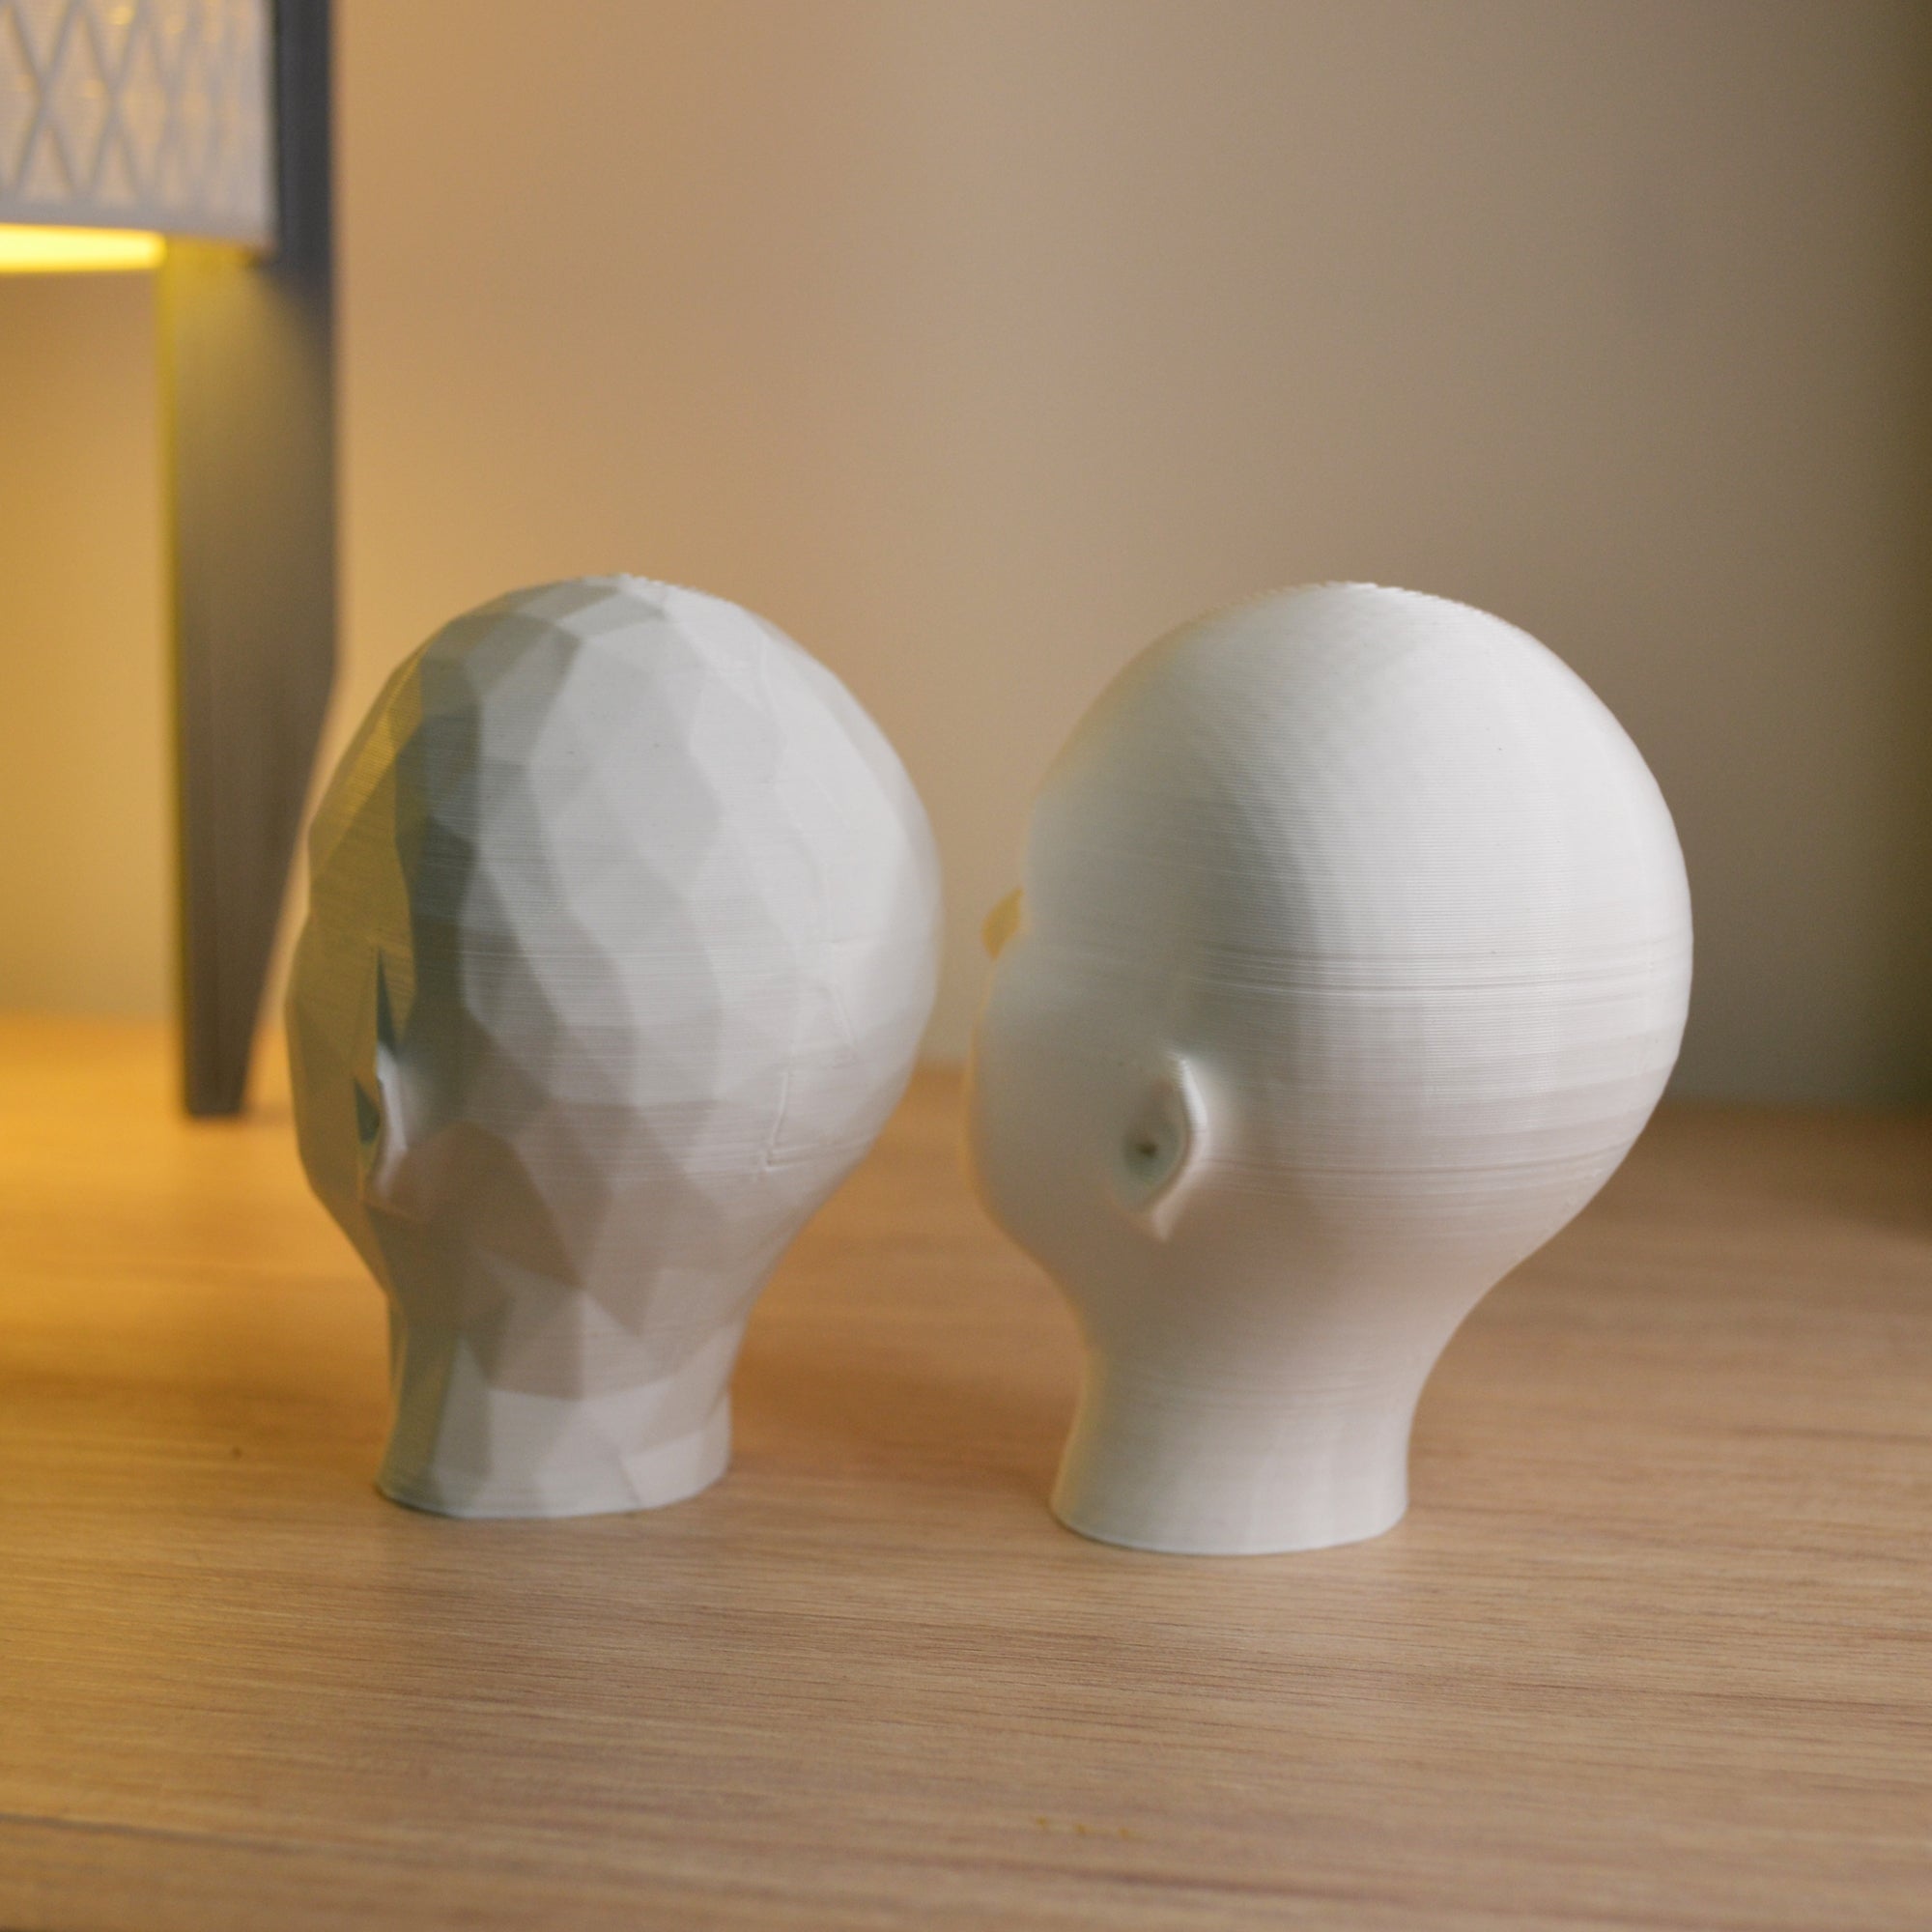 Elegant 3D Design Heads: Union of High and Low Resolution